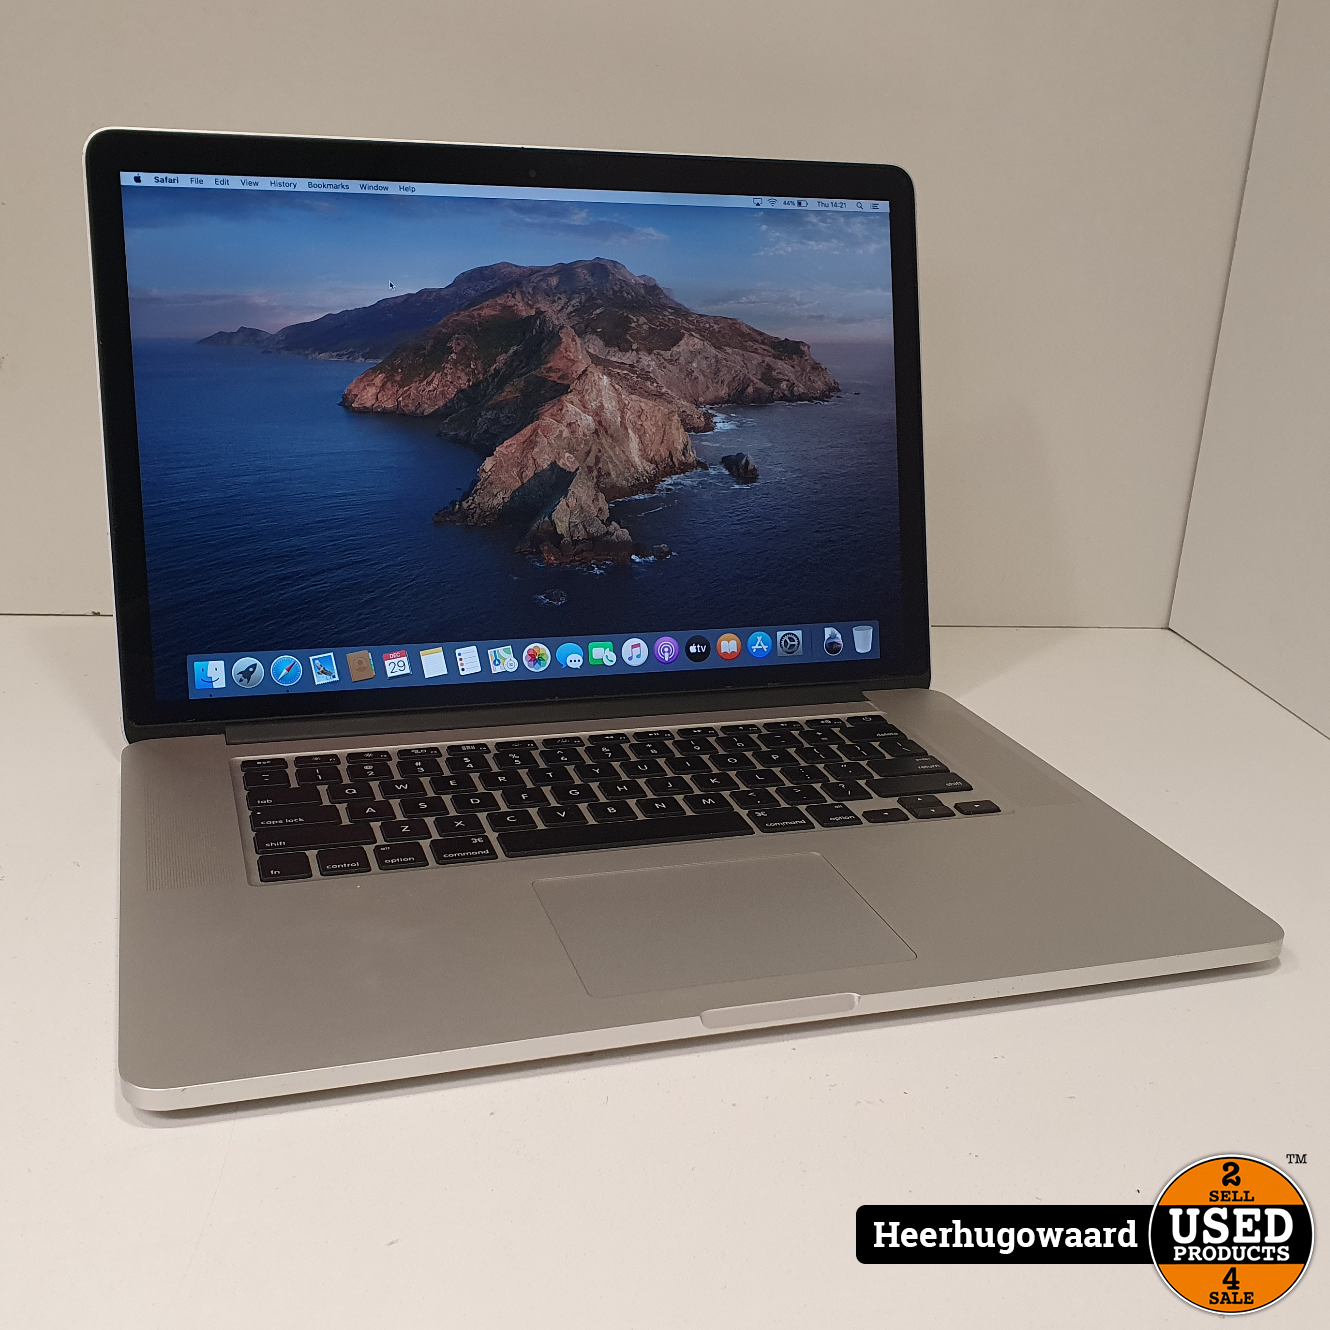 MacBook Pro 15 inch Mid 2014 - i7 16GB 256GB SSD - Used Products ...